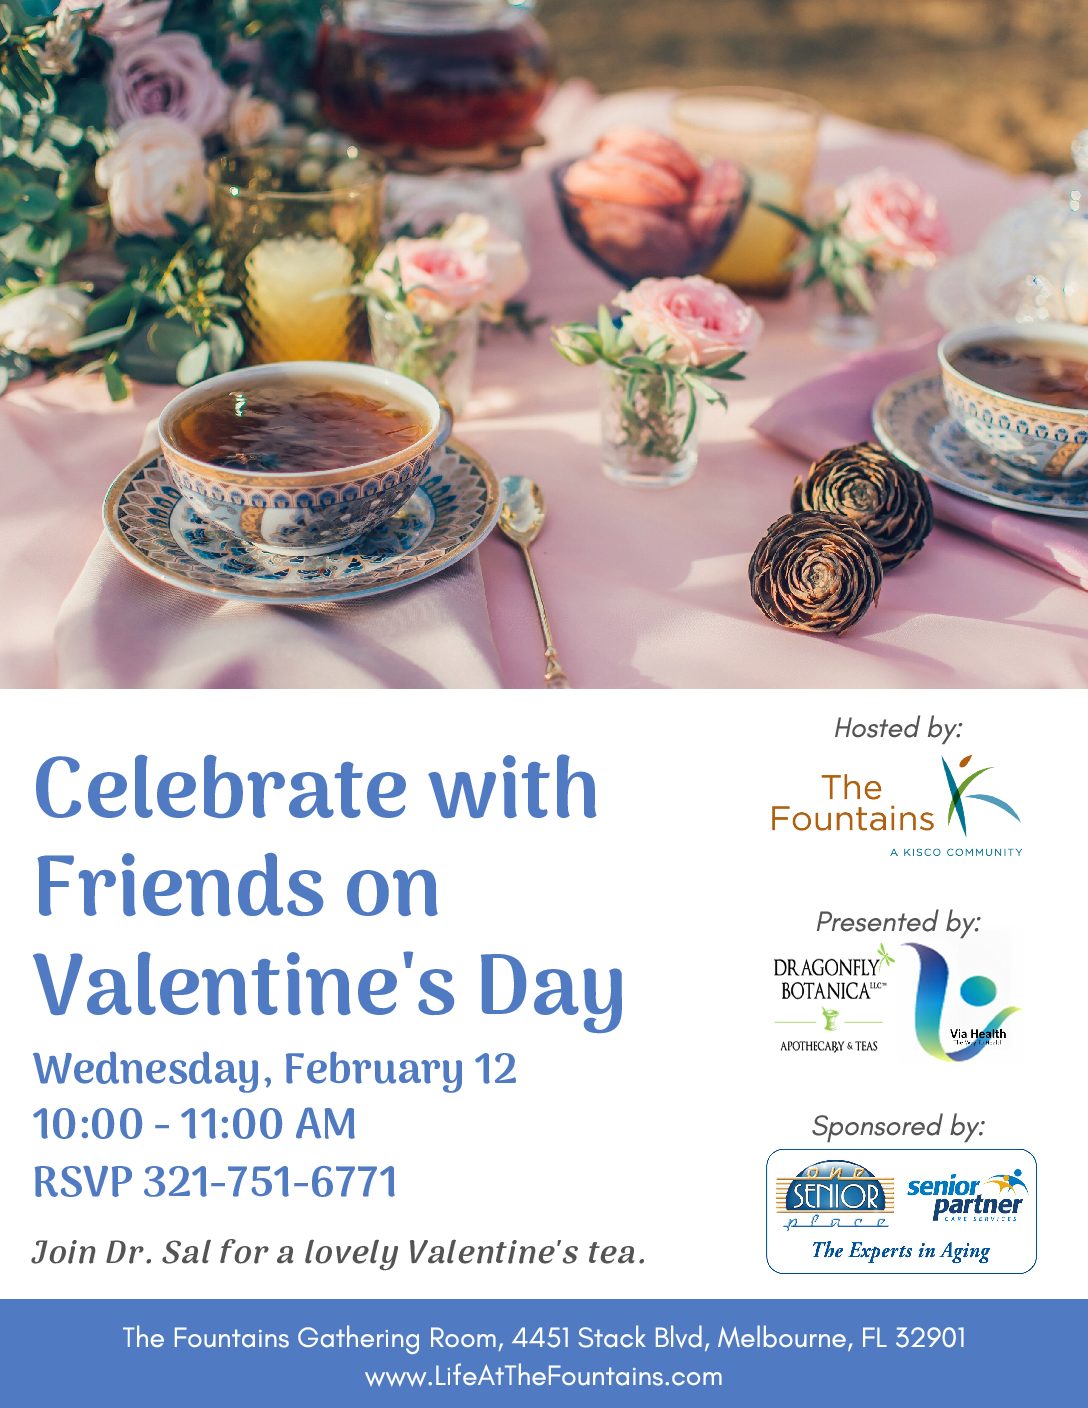 'Celebrate with Friends on Valentine's Day' at The Fountains of Melbourne